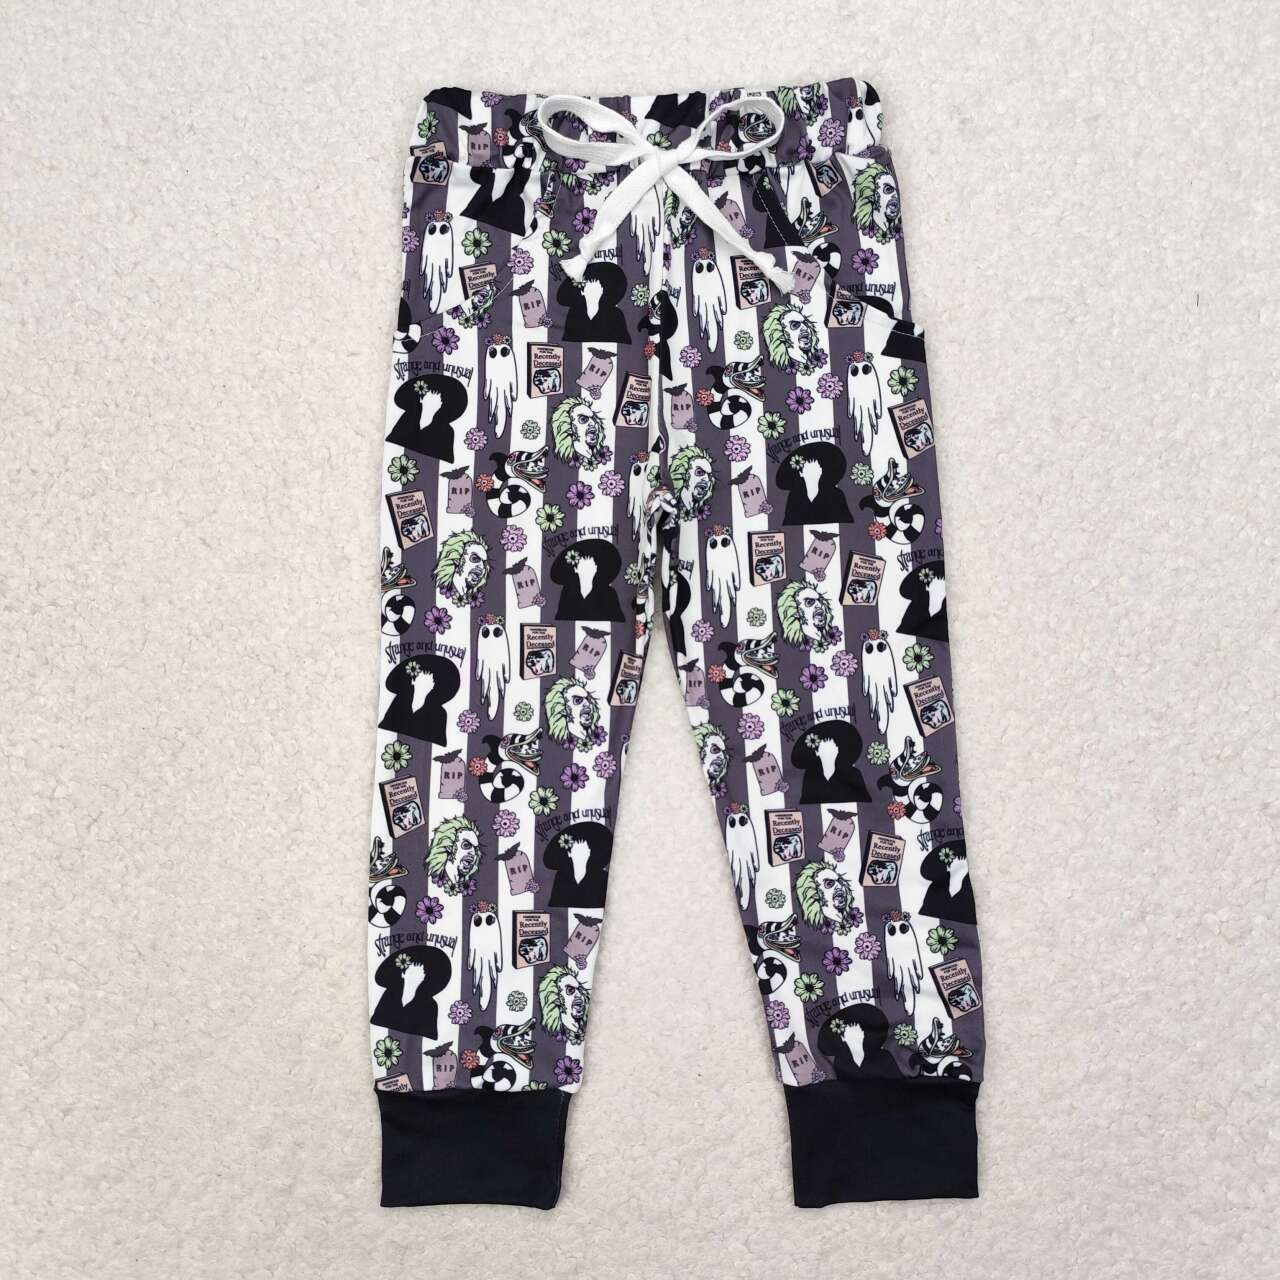 RTS no moq P0480  Clothes for girls black and white striped trousers